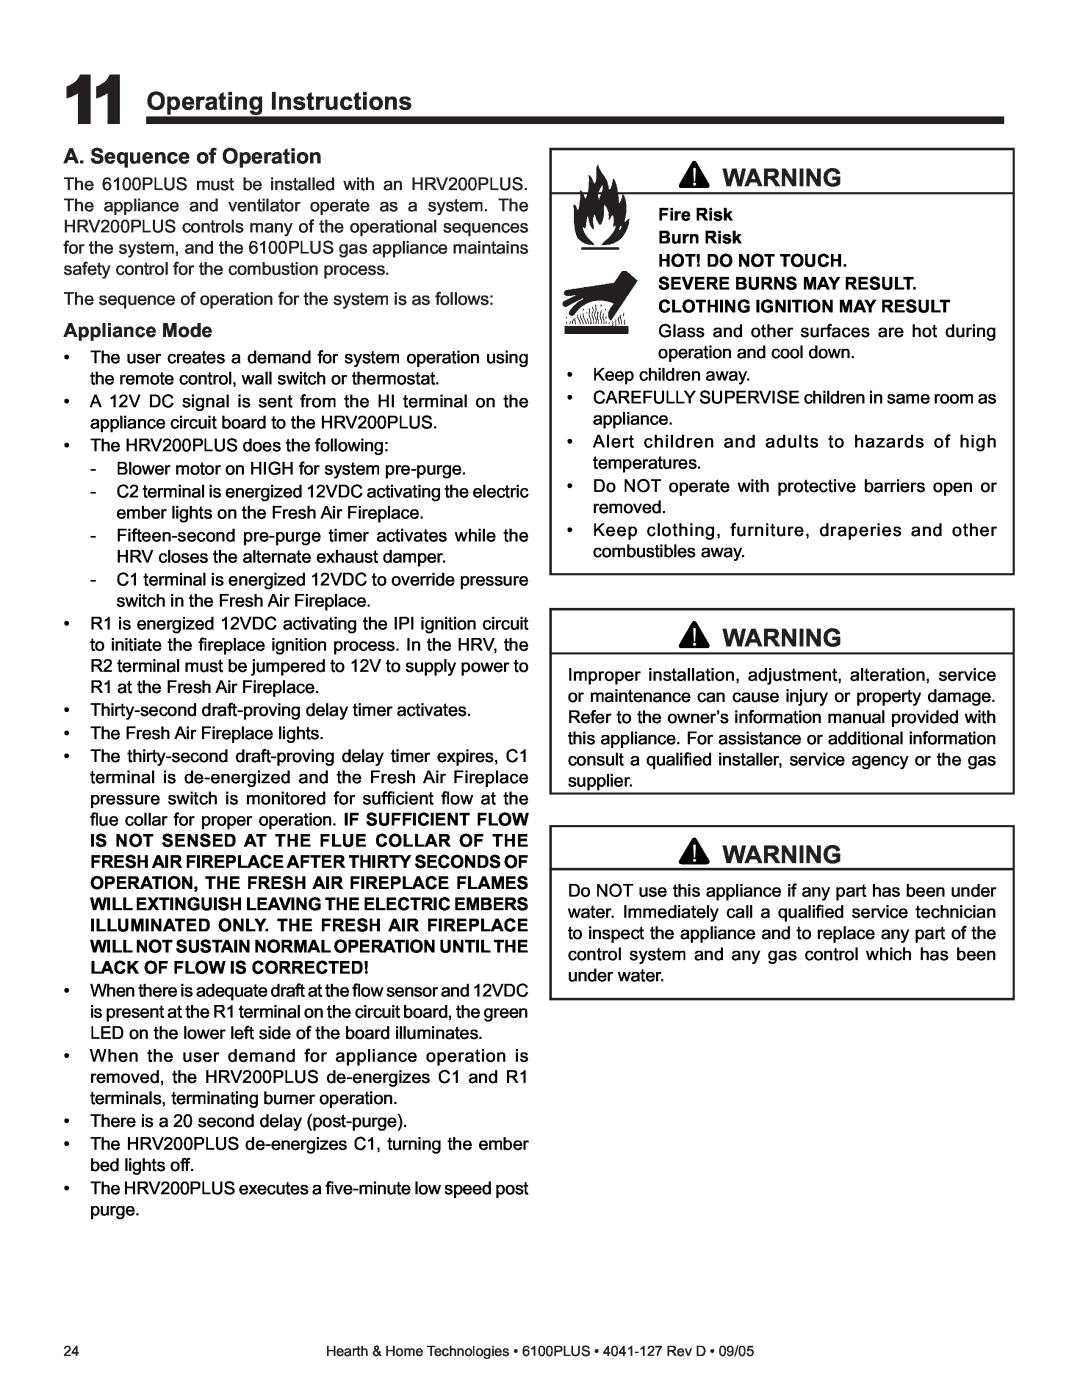 Heat & Glo LifeStyle 6100PLUS Operating Instructions, A. Sequence of Operation, Appliance Mode, Severe Burns May Result 